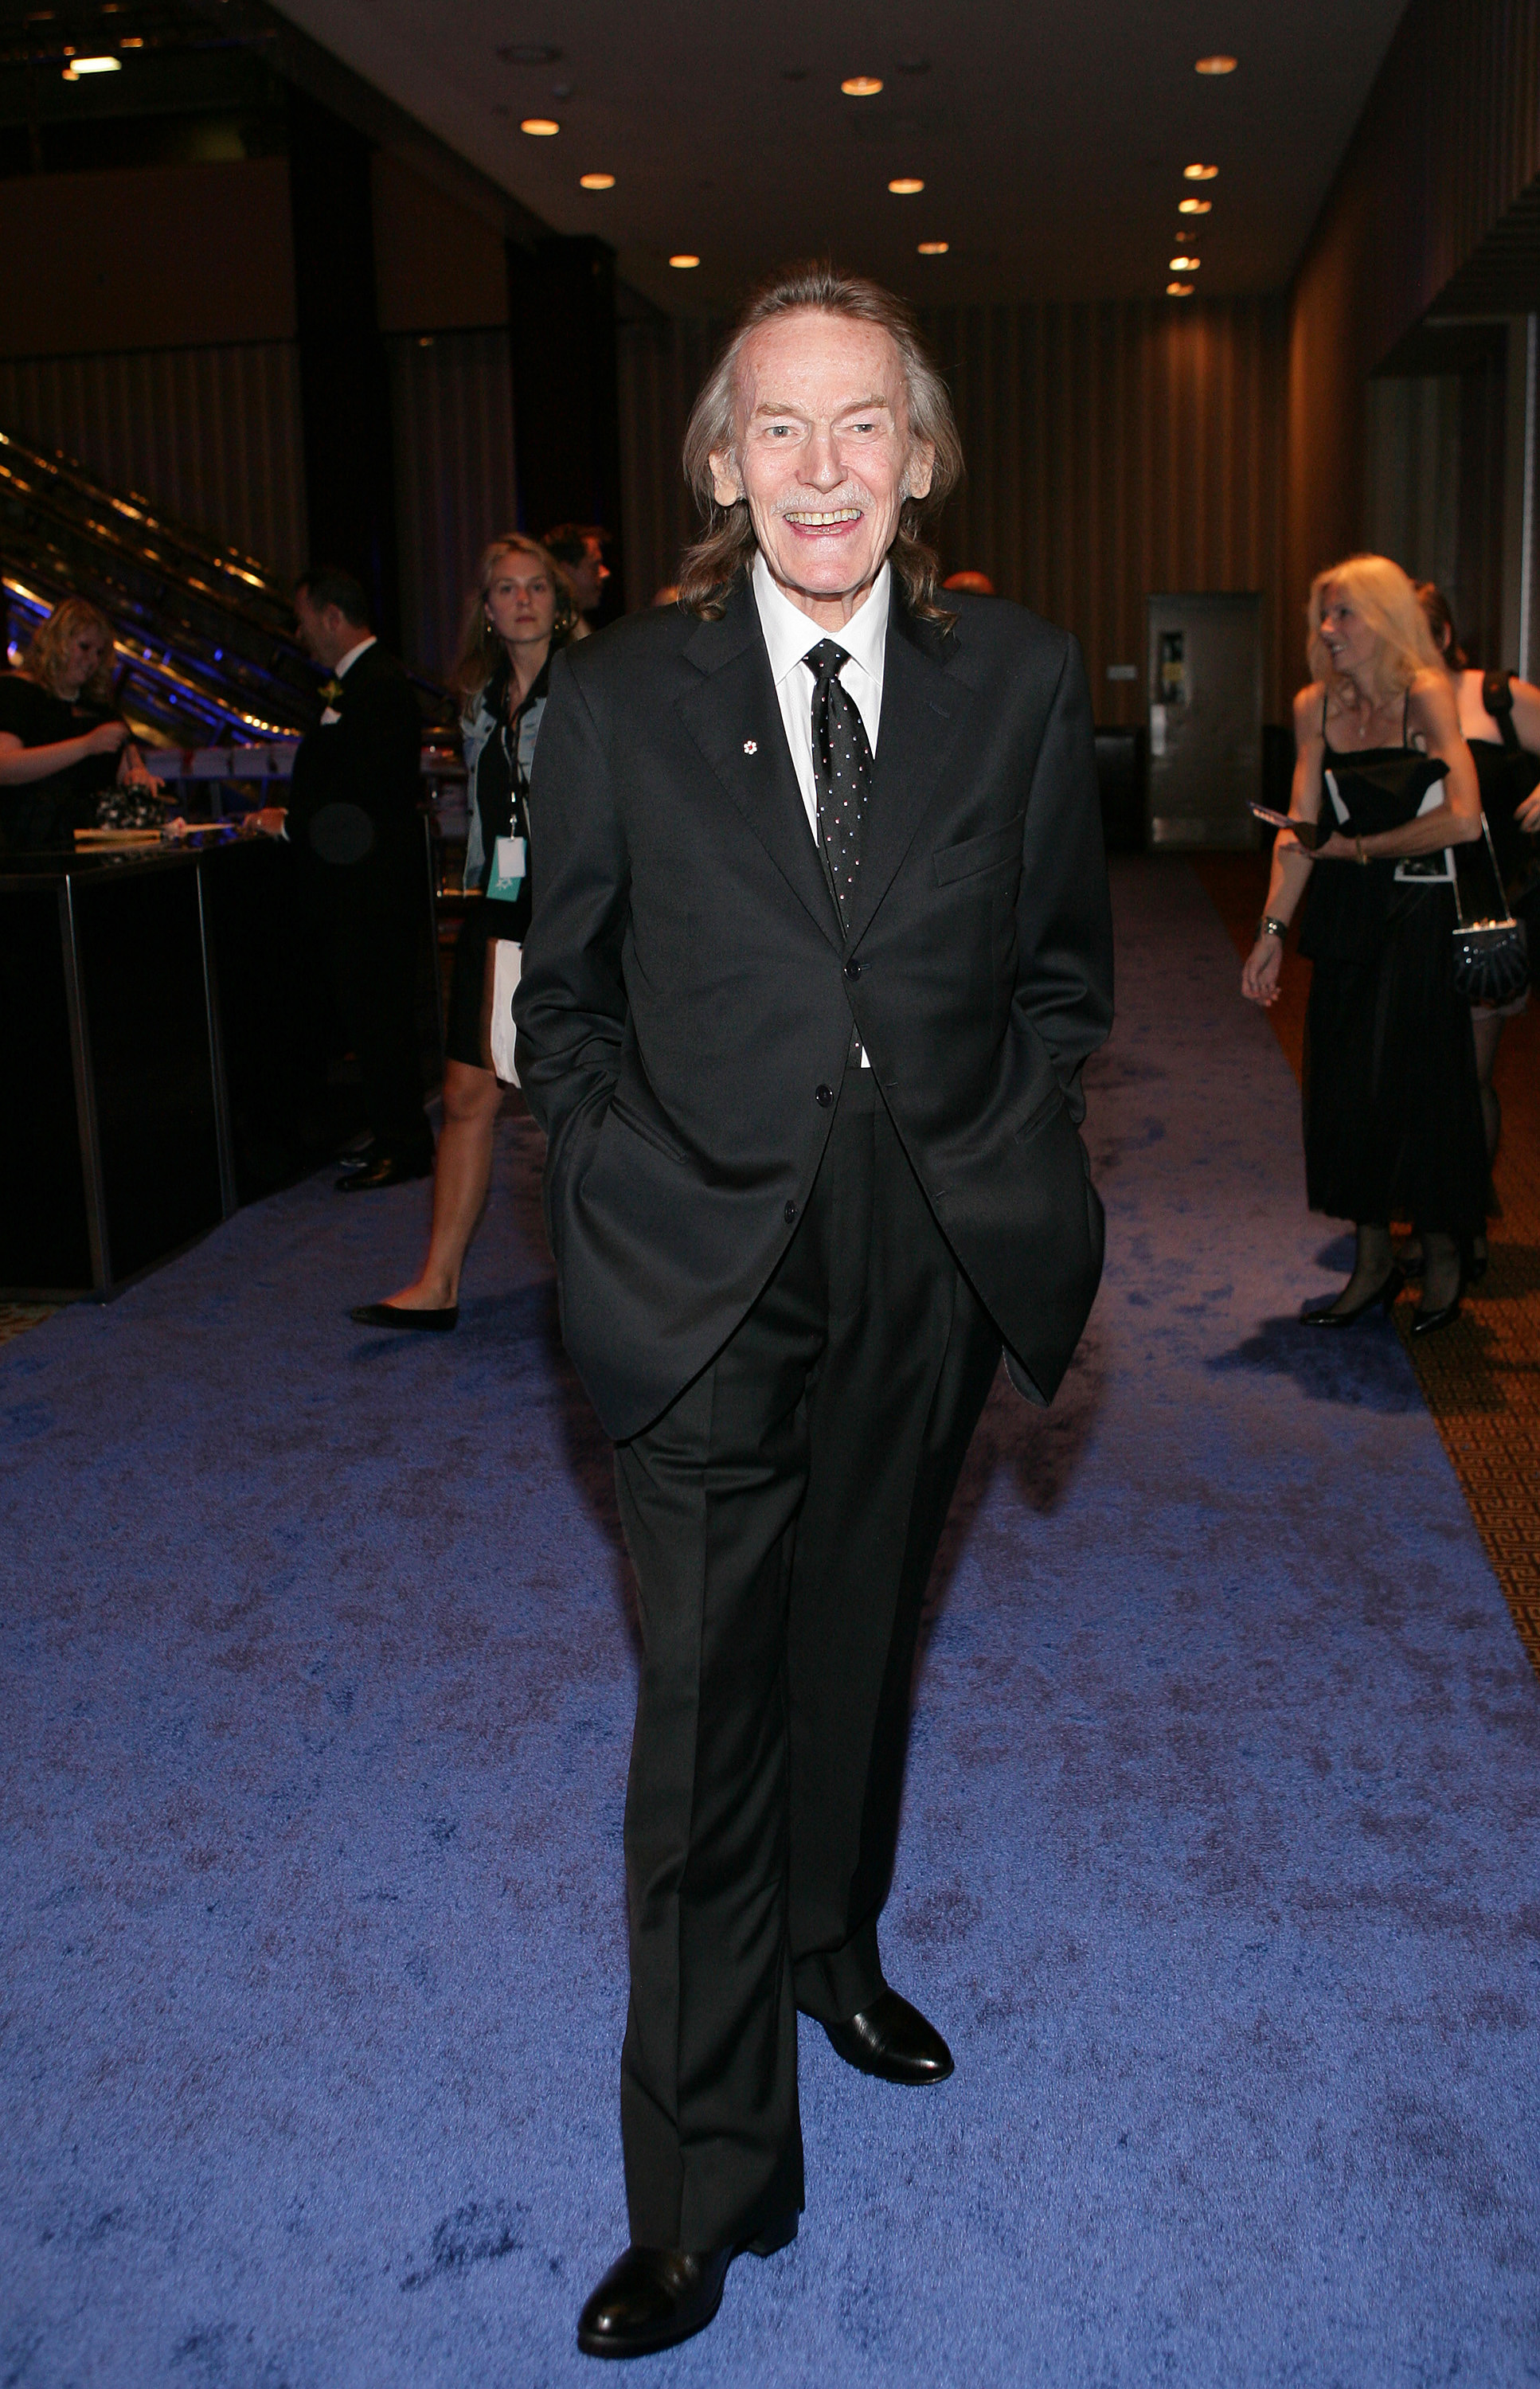 Gordon Lightfoot during the 2009 RBC Inductee Charity Ball at the Sheraton Centre Toronto Hotel on September 12, 2009, in Toronto, Canada. | Source: Getty Images